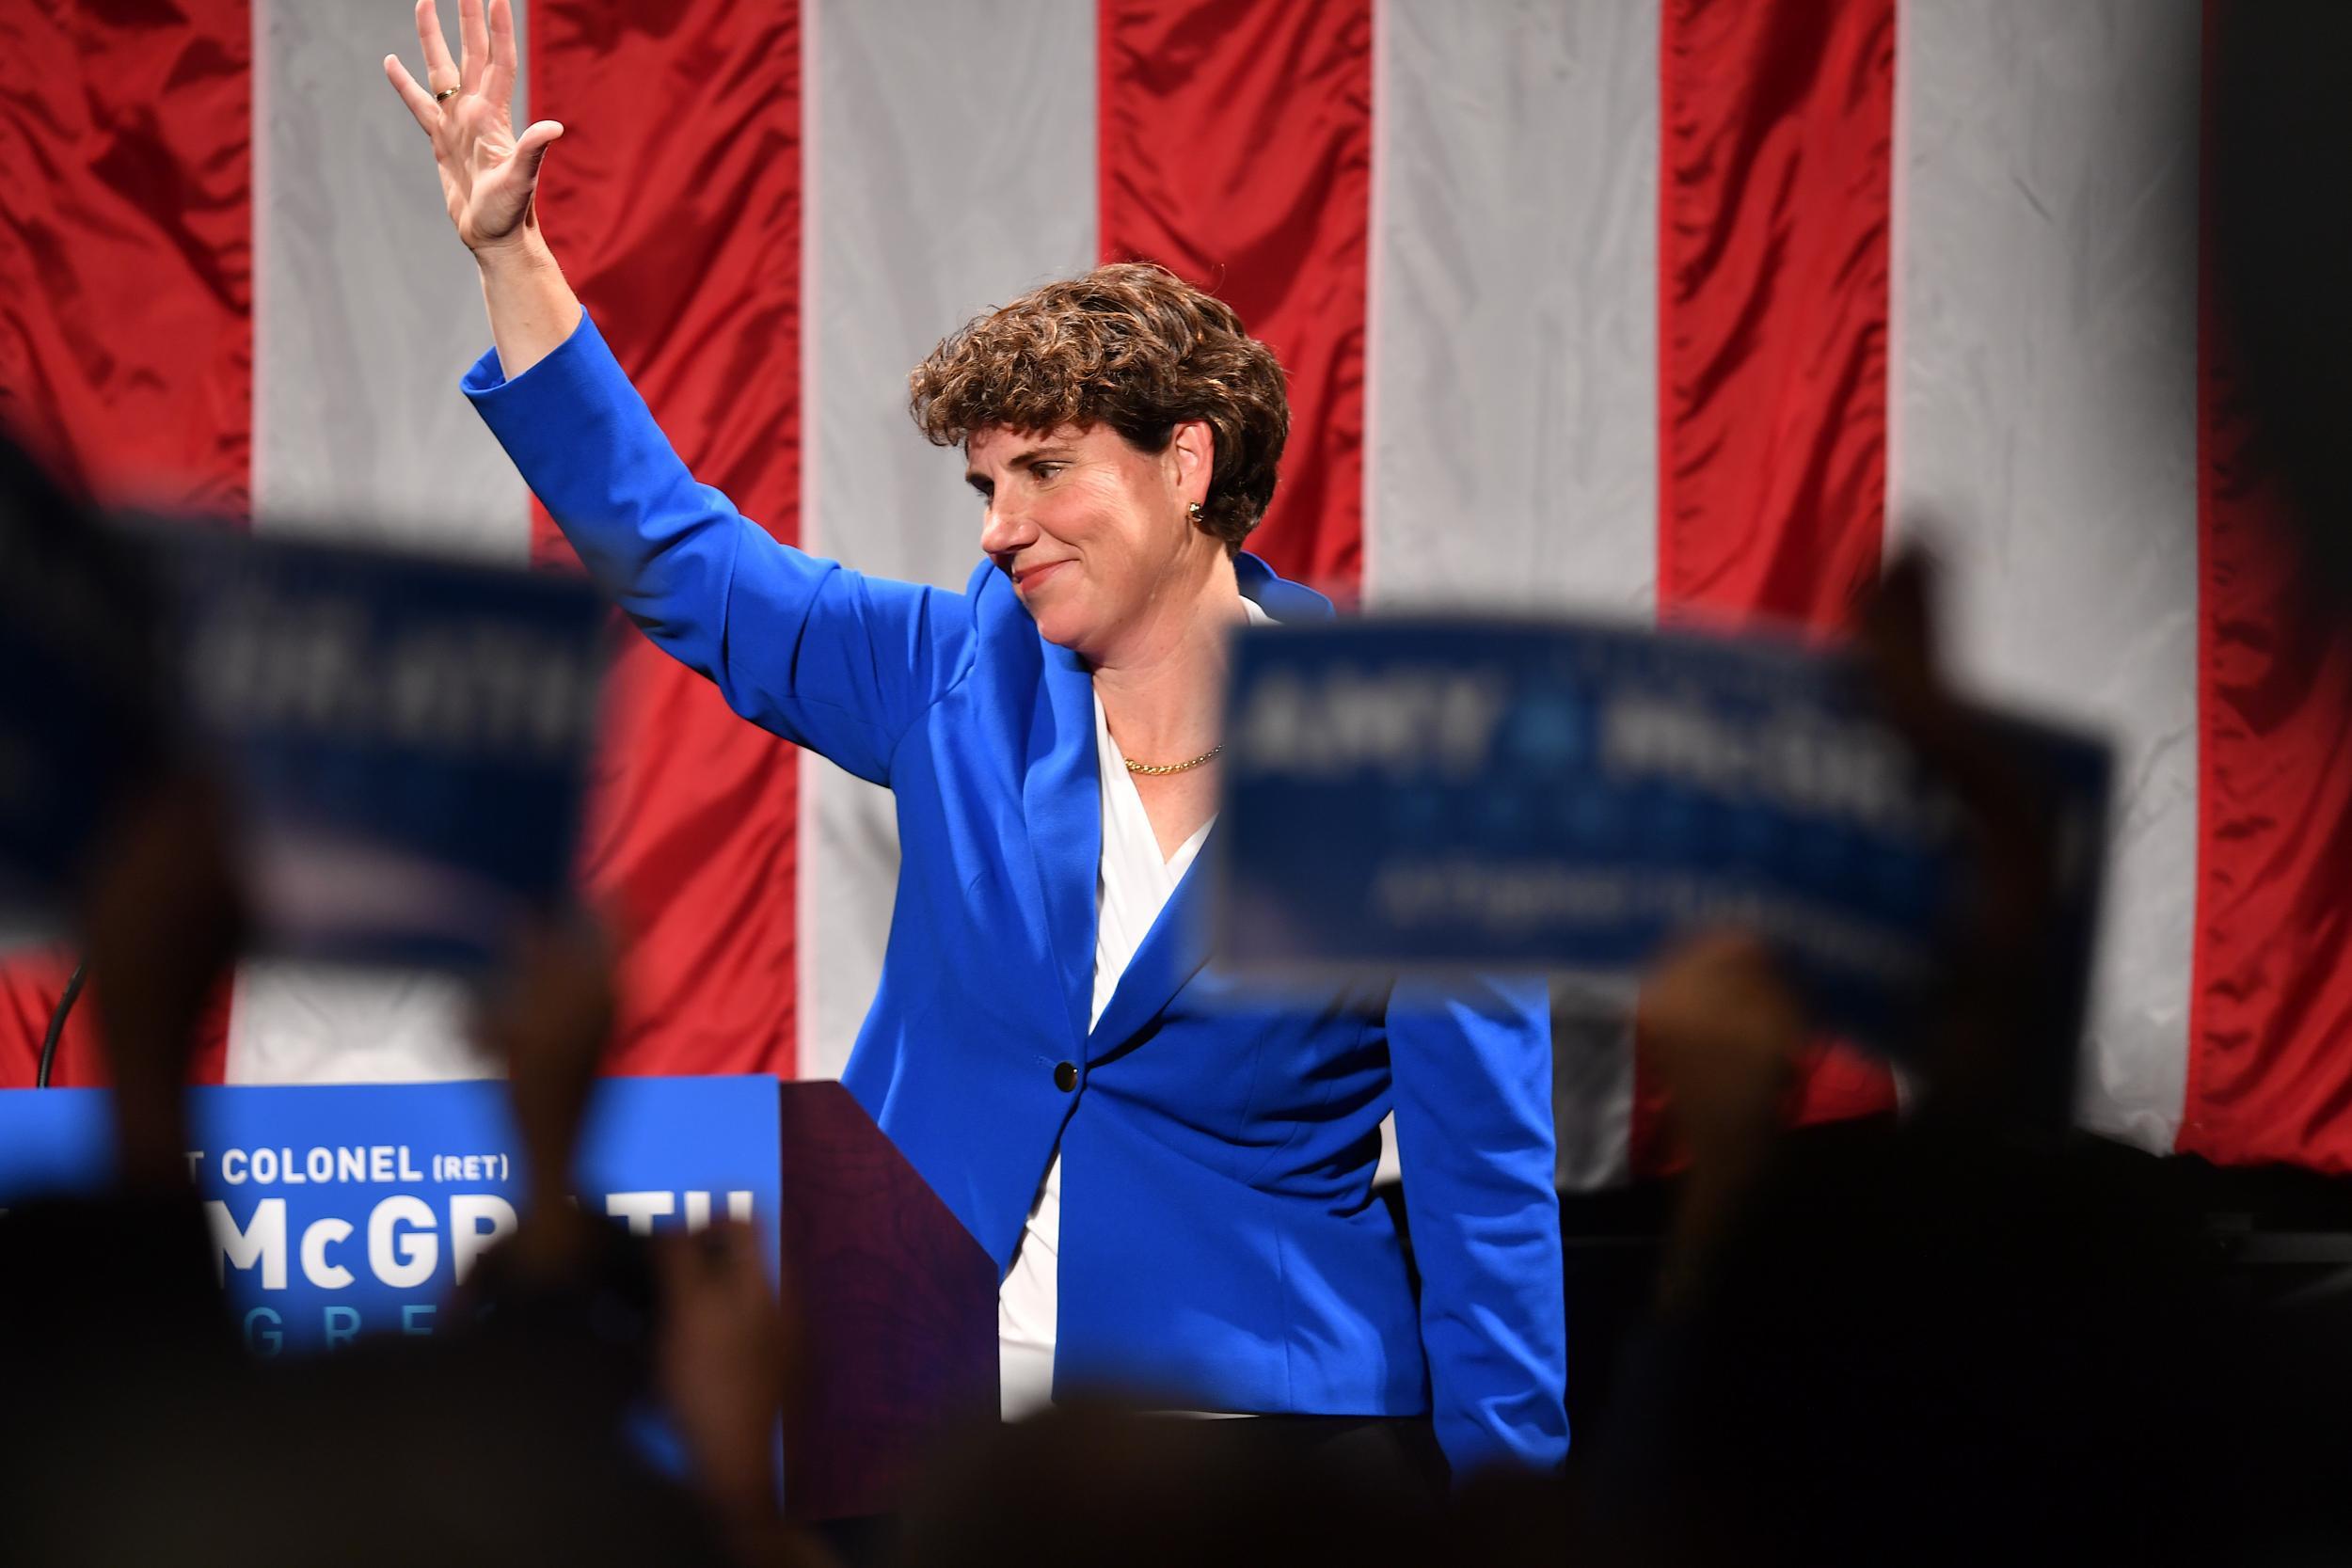 Kentucky Democratic Senate candidate Amy McGrath has raised the most money of any congressional candidate this cycle. (Photo by Jason Davis/Getty Images)